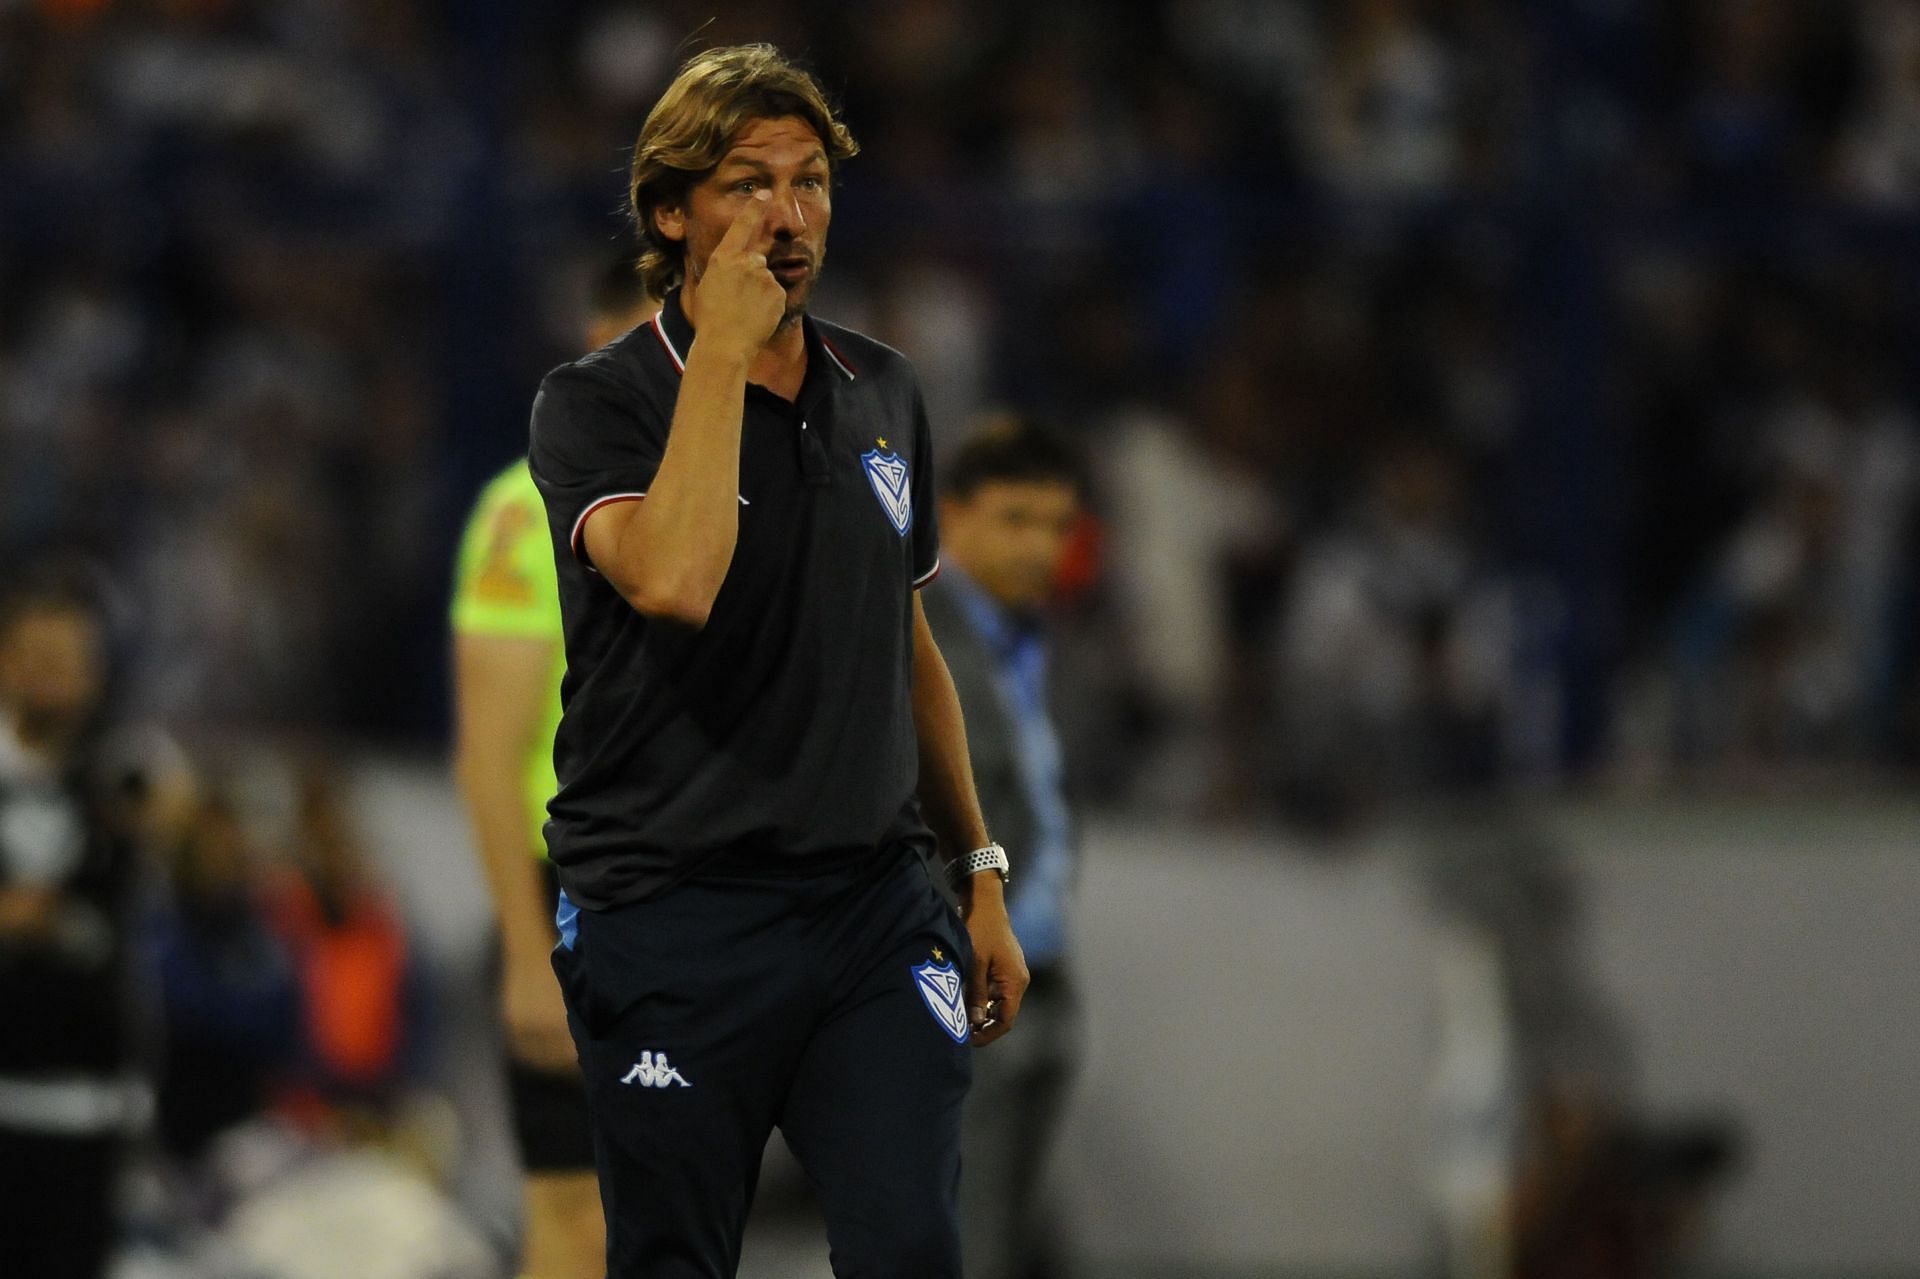 Gabriel Heinze has taken up coaching after a fairly successful career as a player.